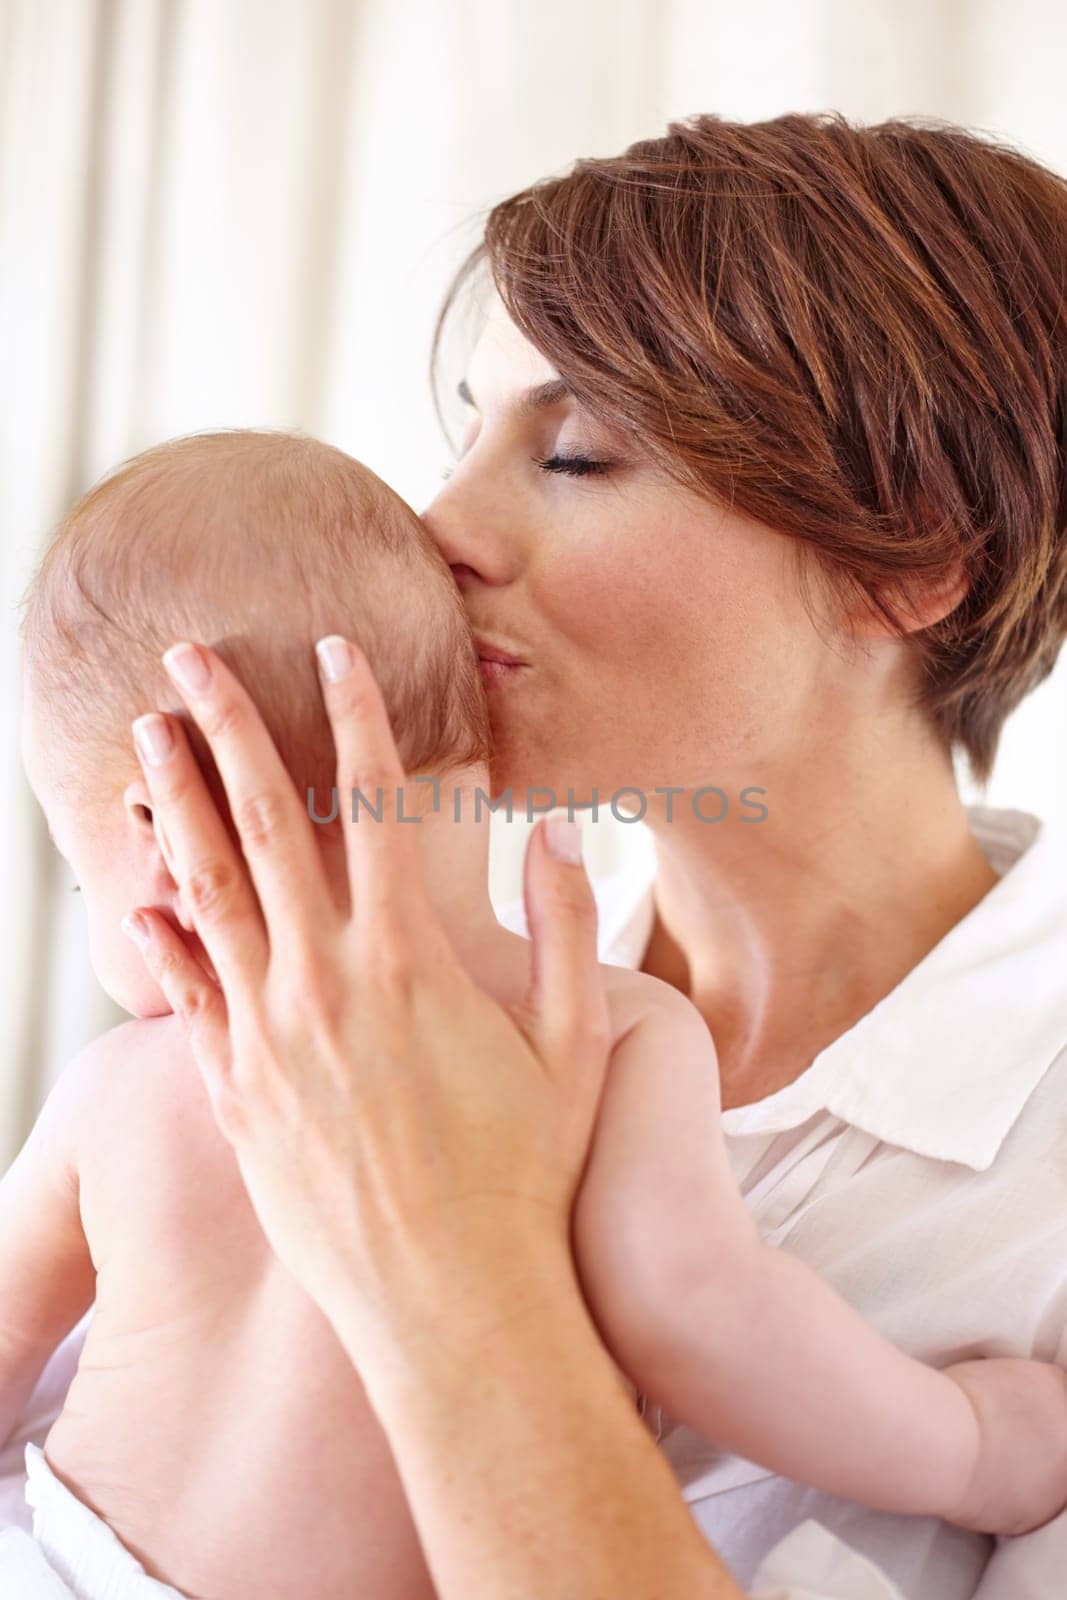 Mother, baby and kiss or love, care and relaxing or play, bonding and joy in parenthood. Mom, kid and motherhood or affection at home, connect and happy for child development, comfort and happiness.